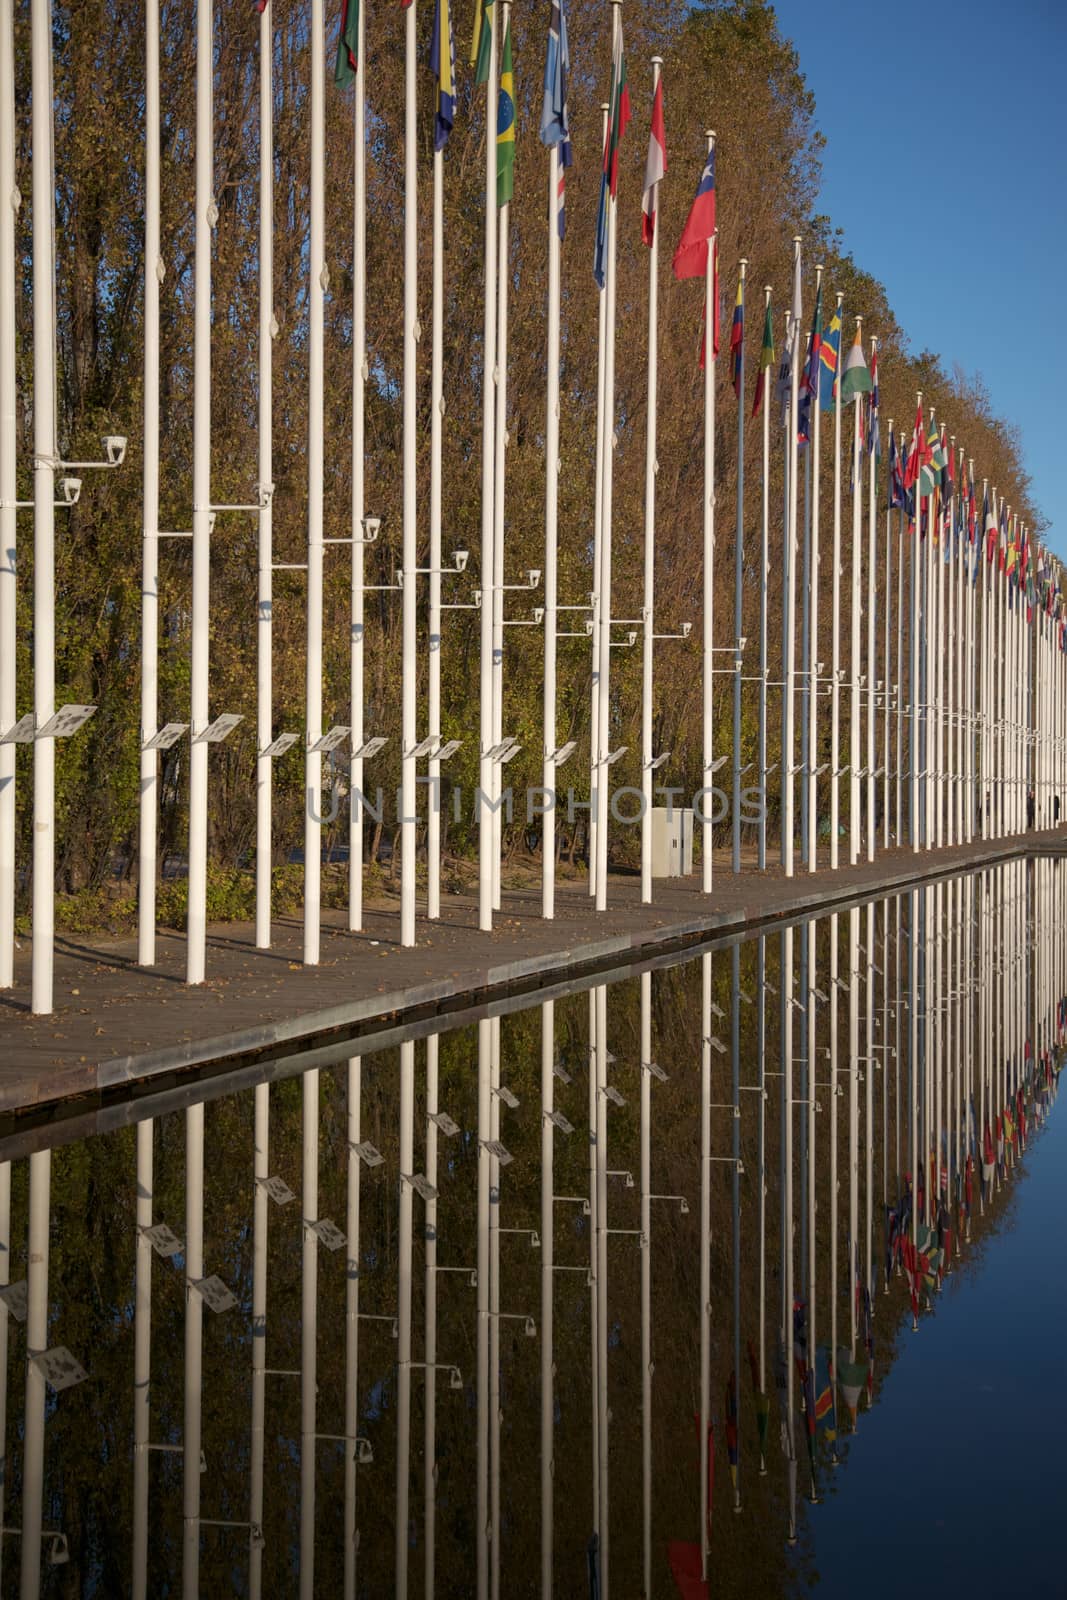 Flags from all over the world in front of a pool at the Lisbon Expo 98 site in Lisbon, Portugal